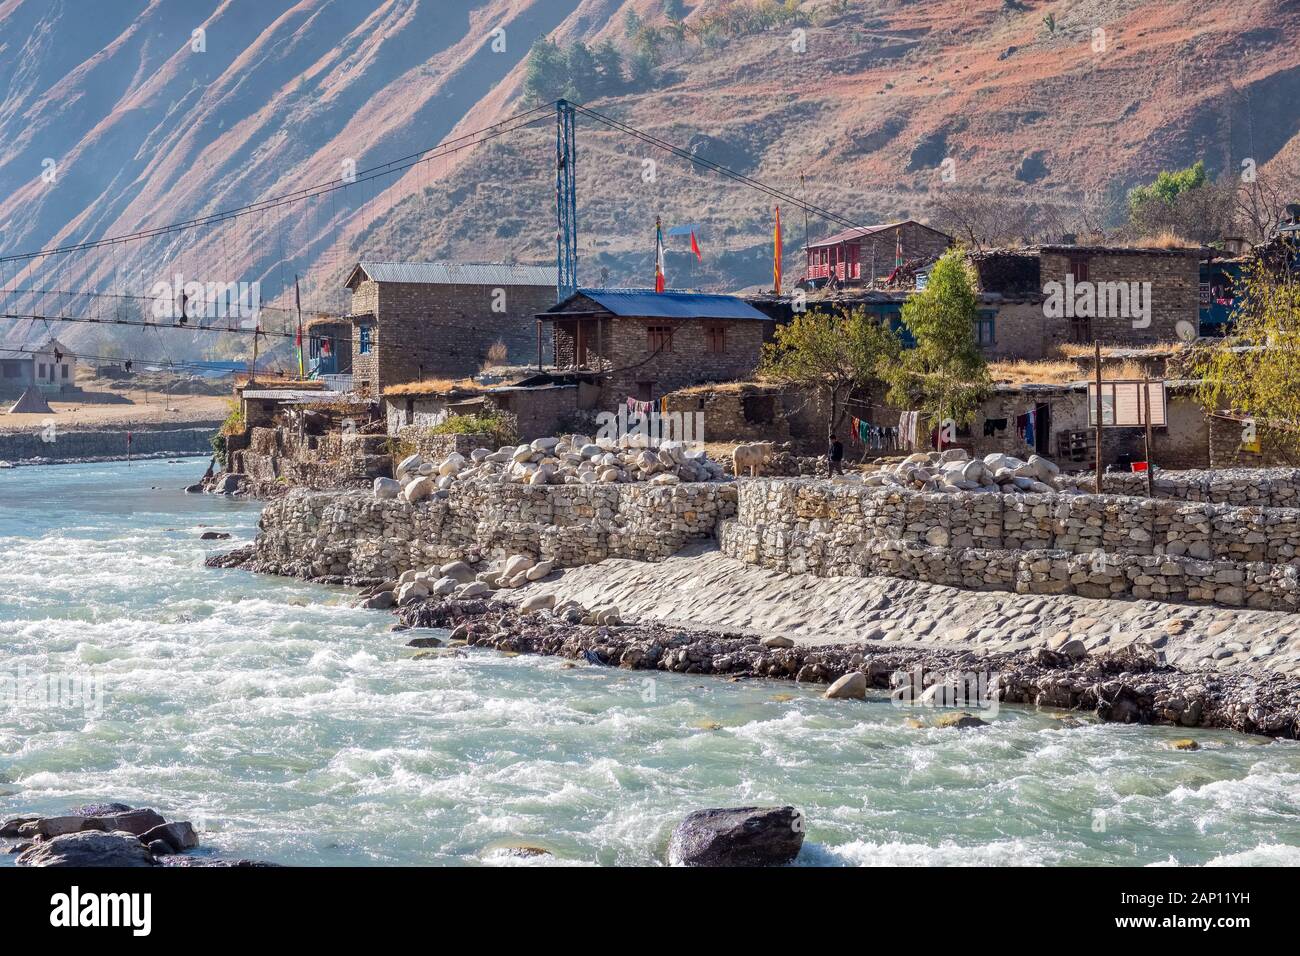 River banks reinforced to prevent flooding / erosion at The village of Dunai in Dolpo, Nepal Stock Photo